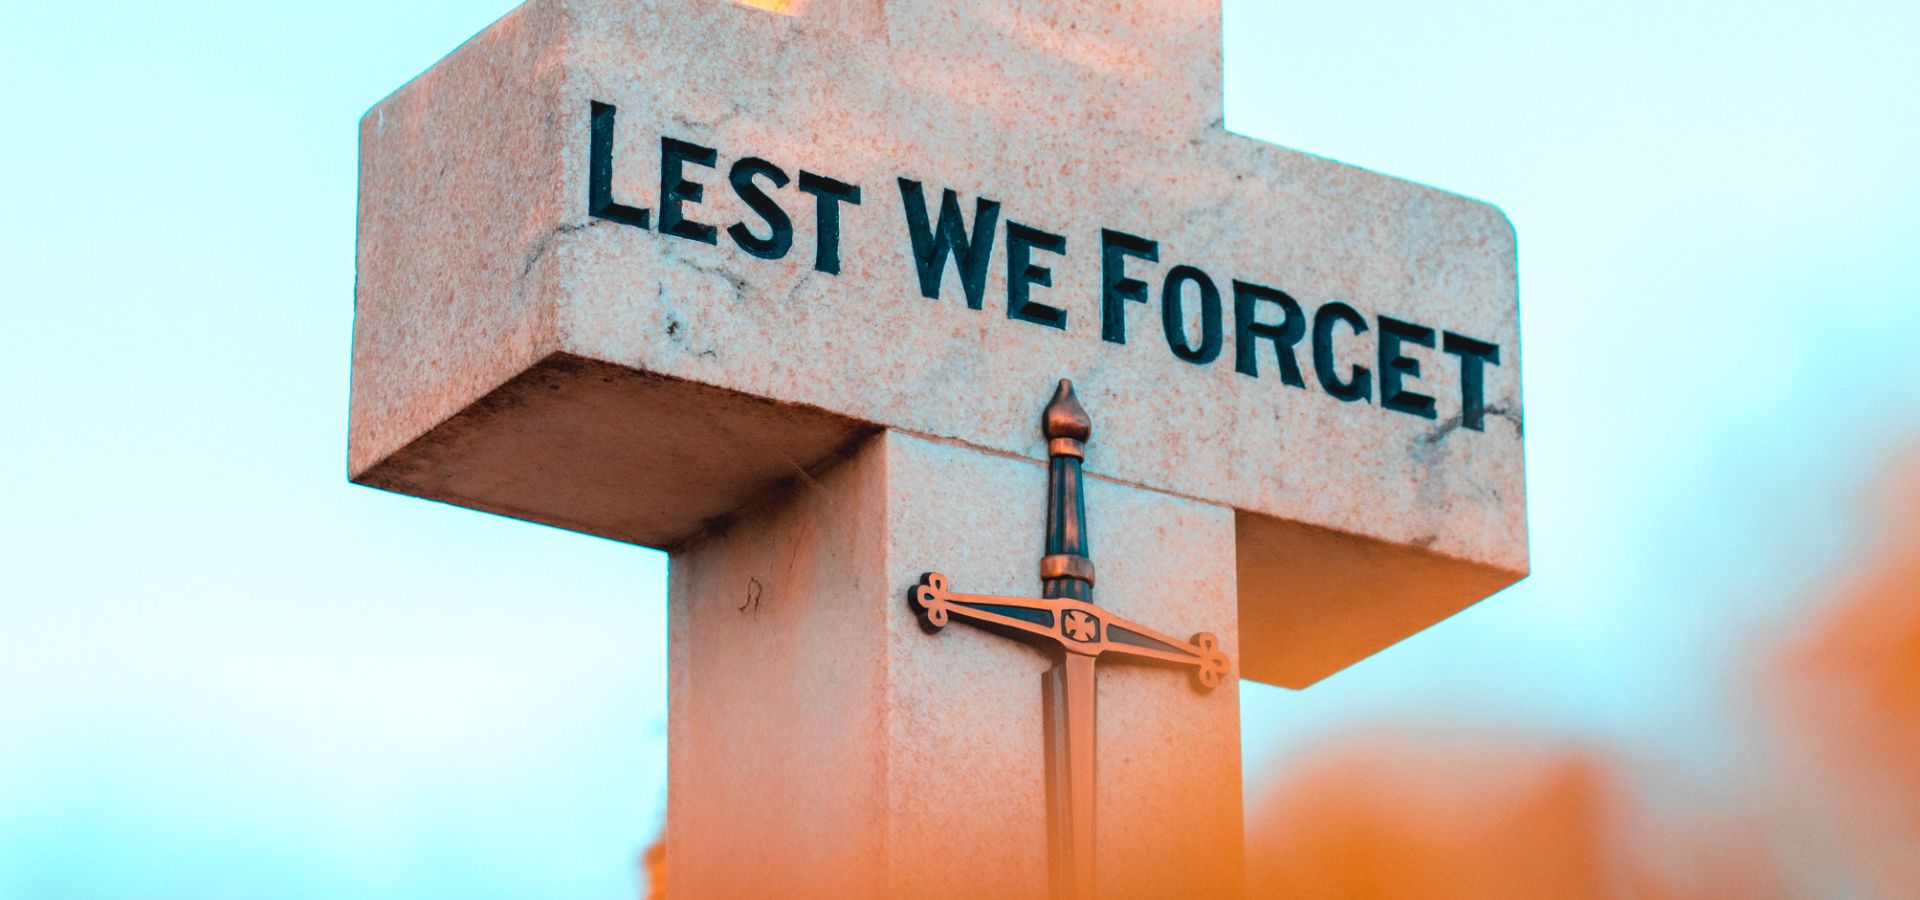 Lest we forget written on a stone cross